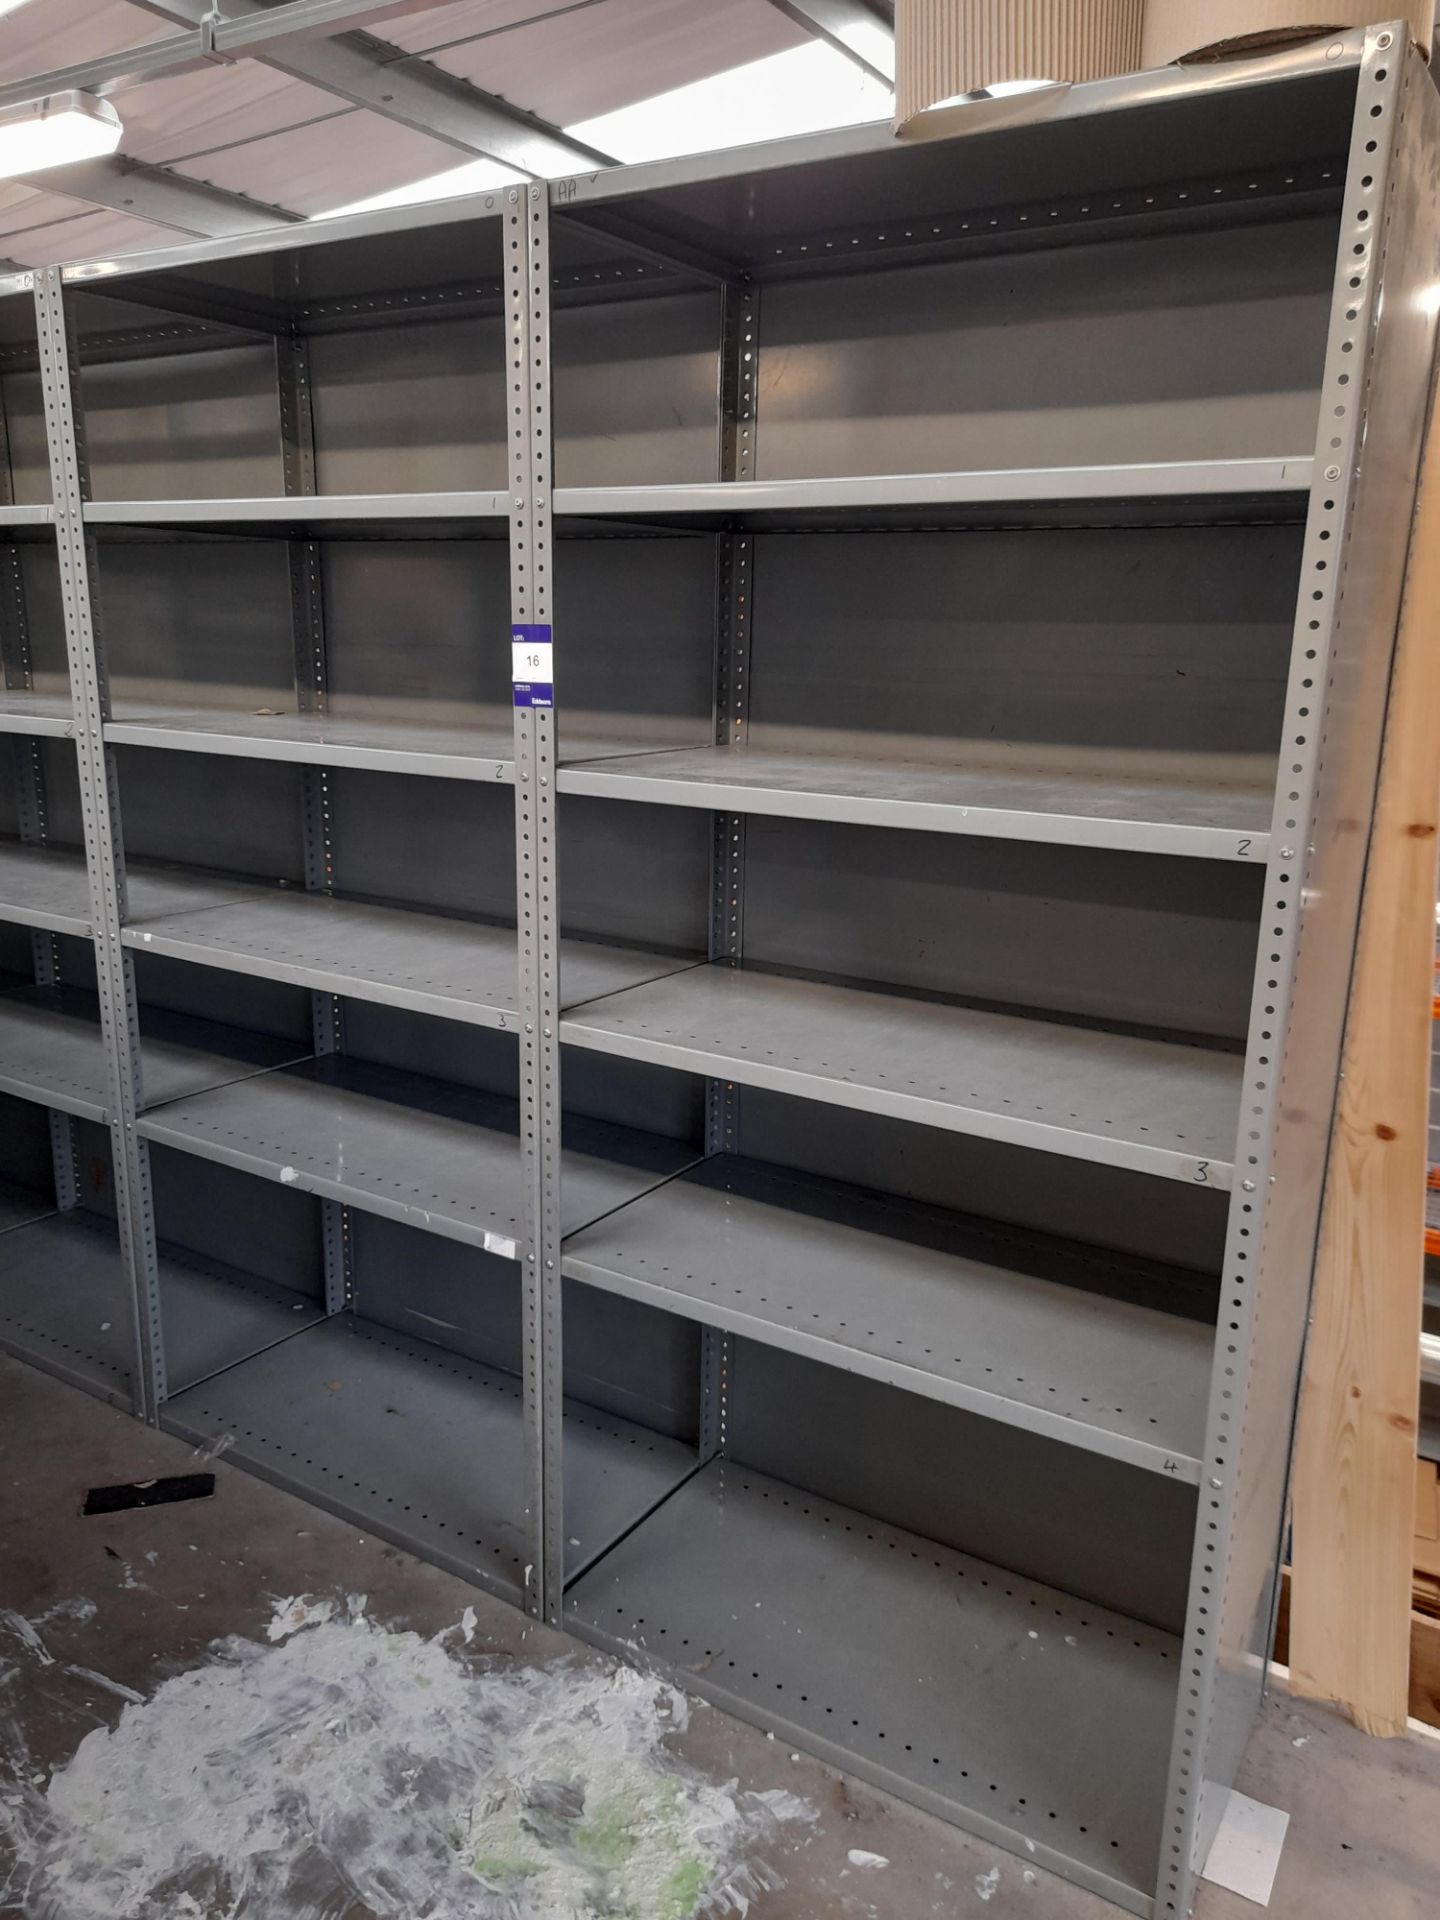 4 x Metal shelving units, approx. 1900mm high, 910mm wide, 475mm depth – located on mezzanine floor - Image 2 of 3